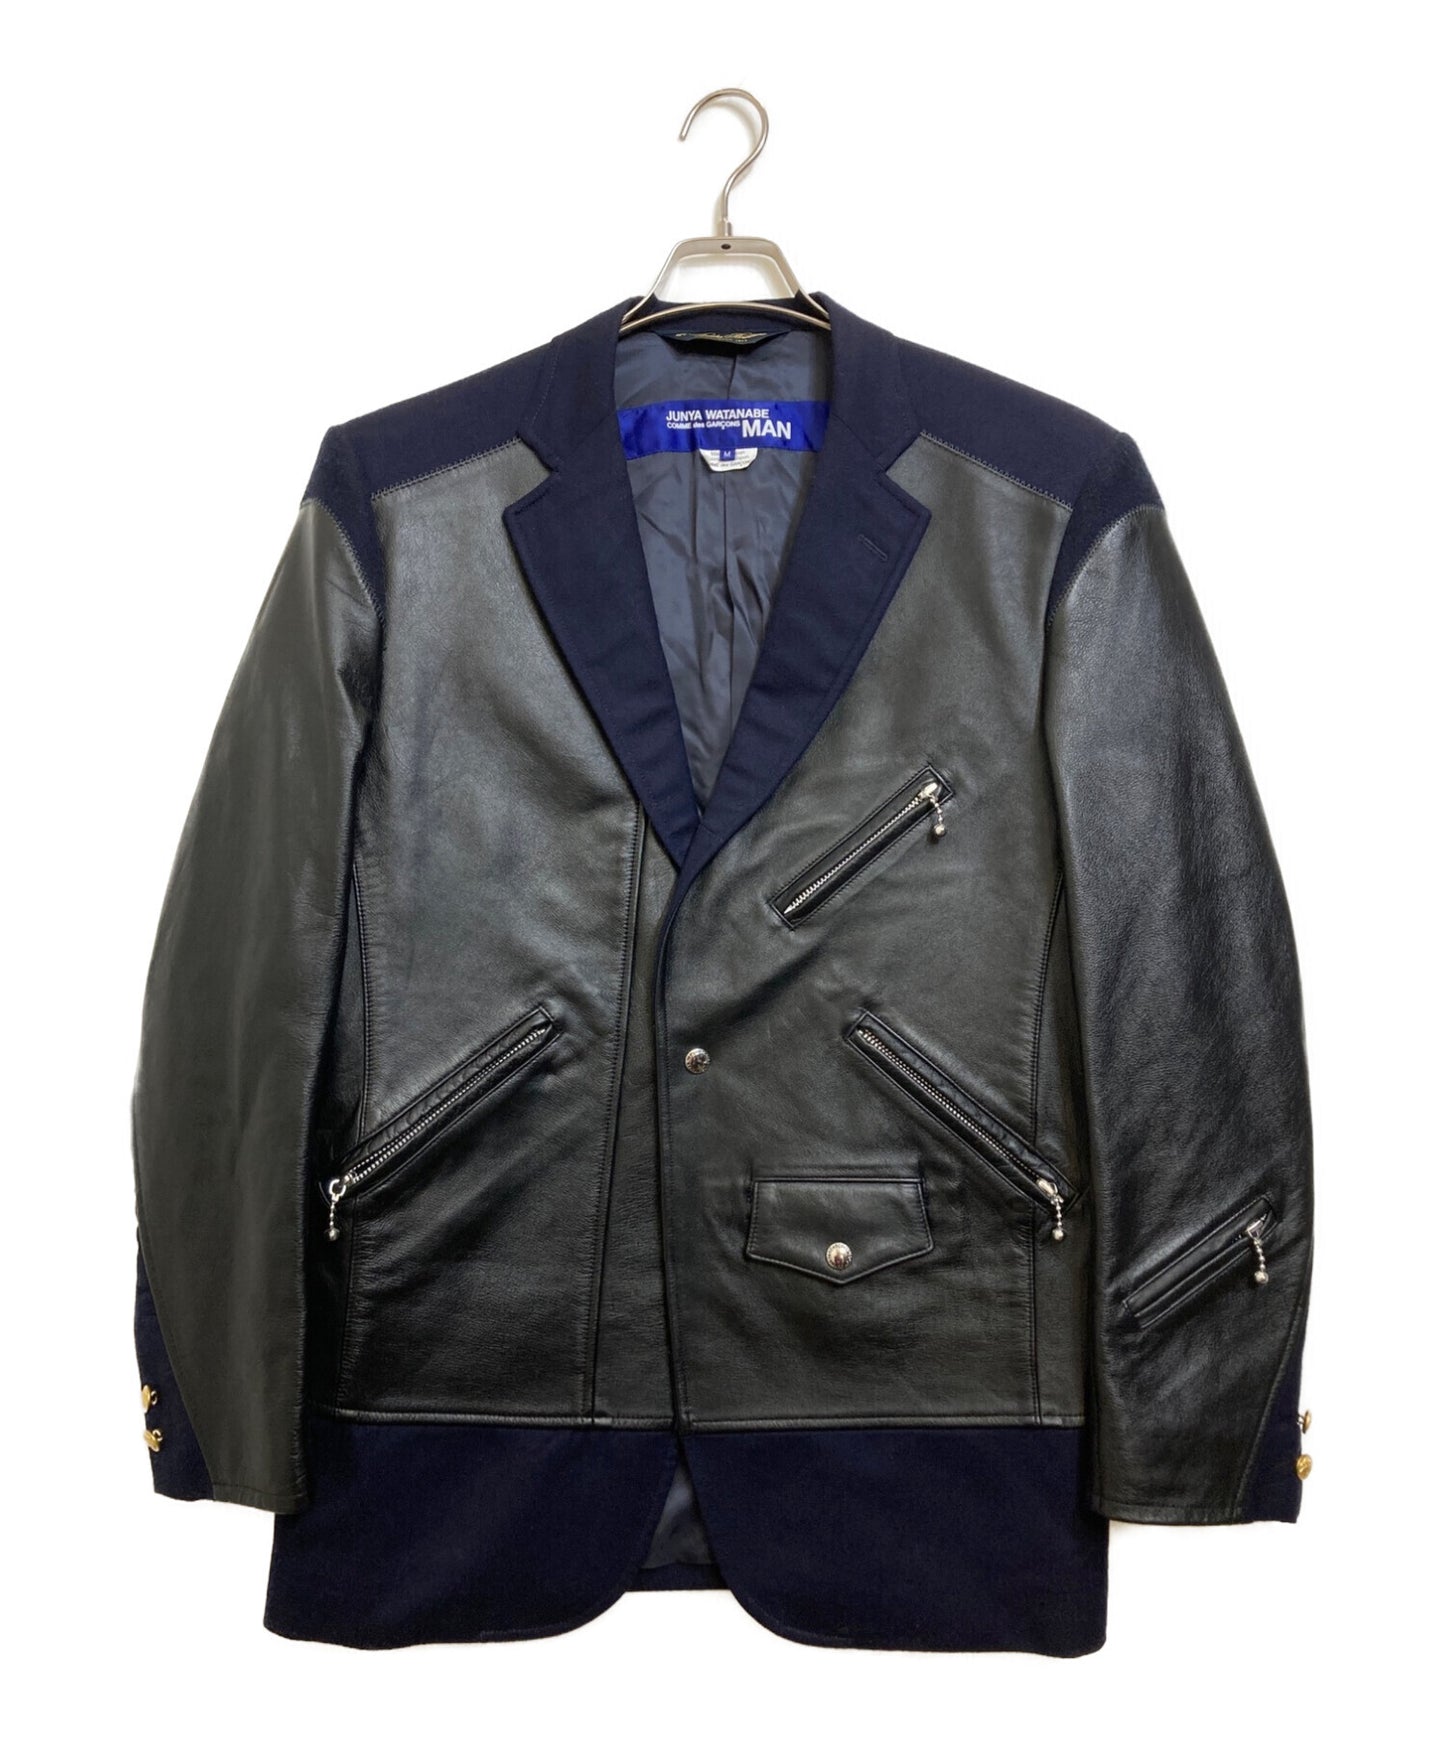 Brooks Brothers x COMME des GARCONS JUNYA WATANABE MAN Riders